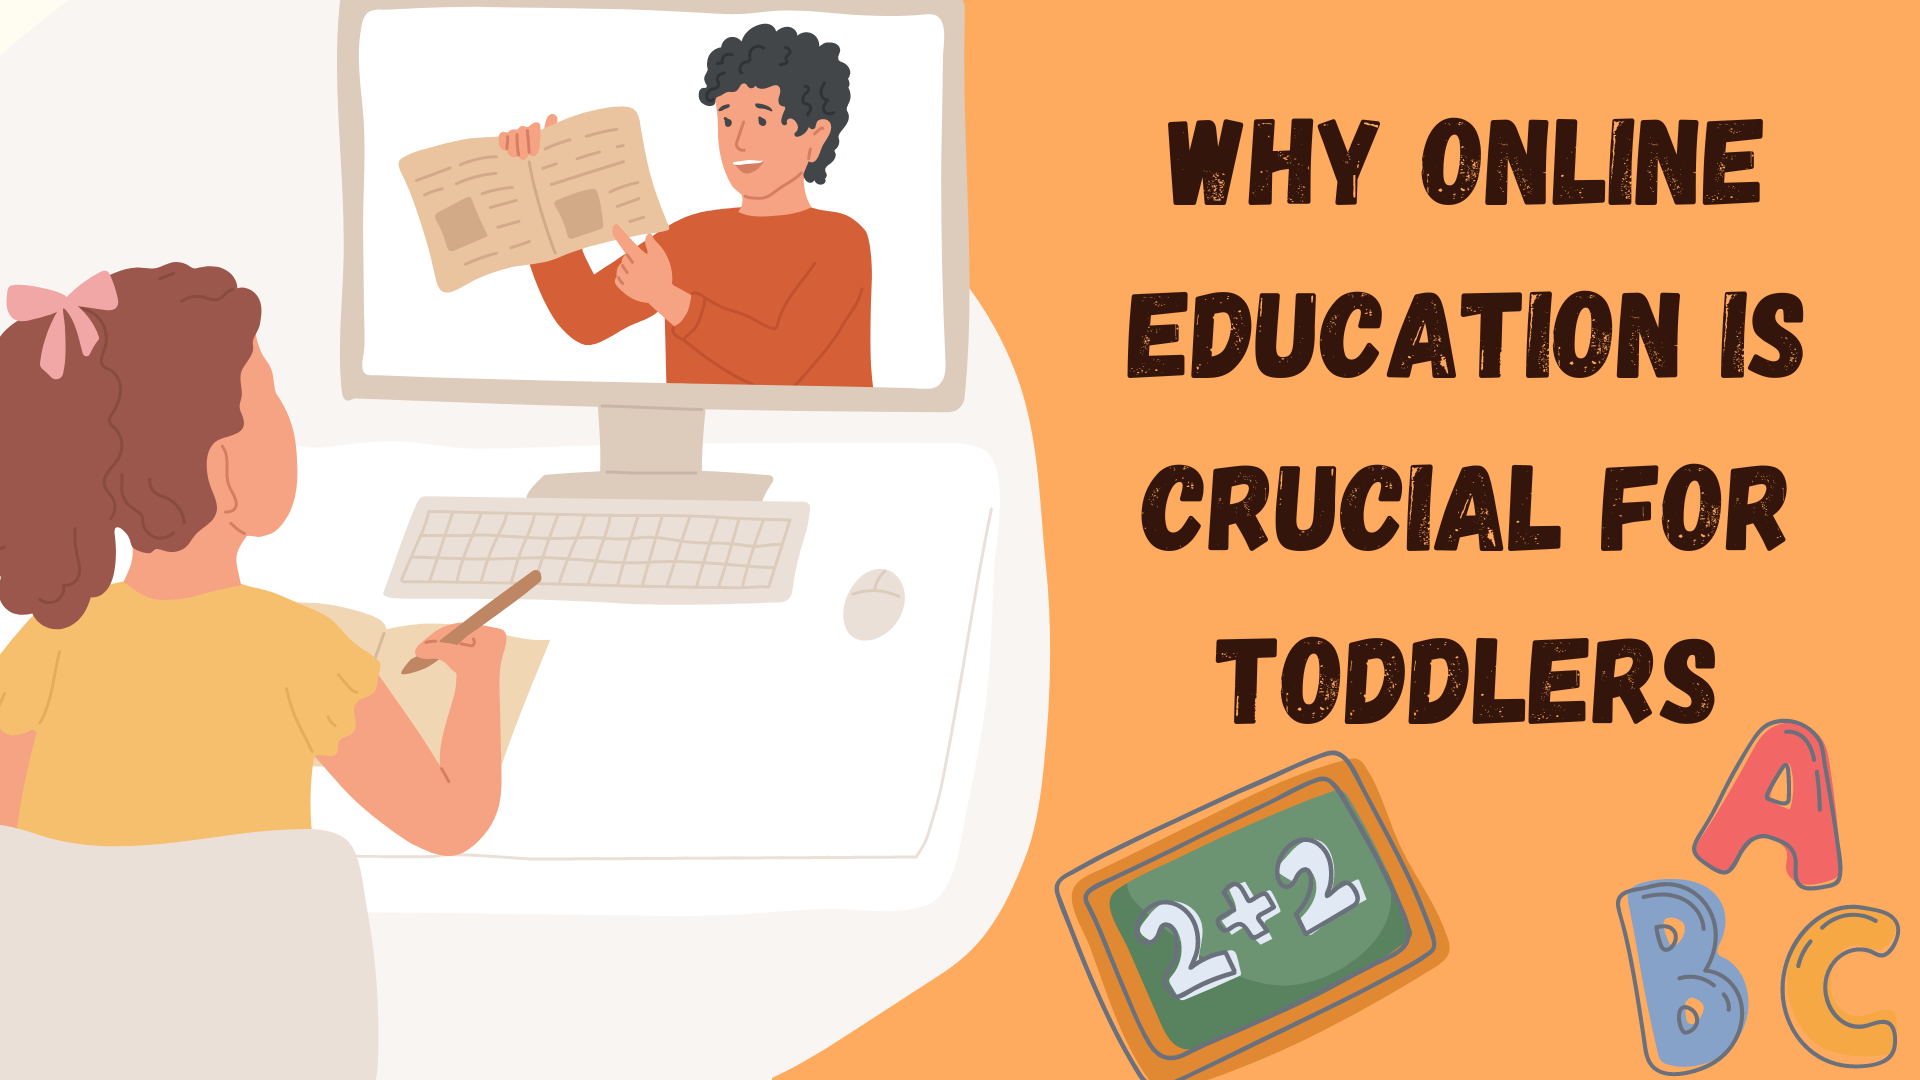 Why Online Education is Crucial for Toddlers